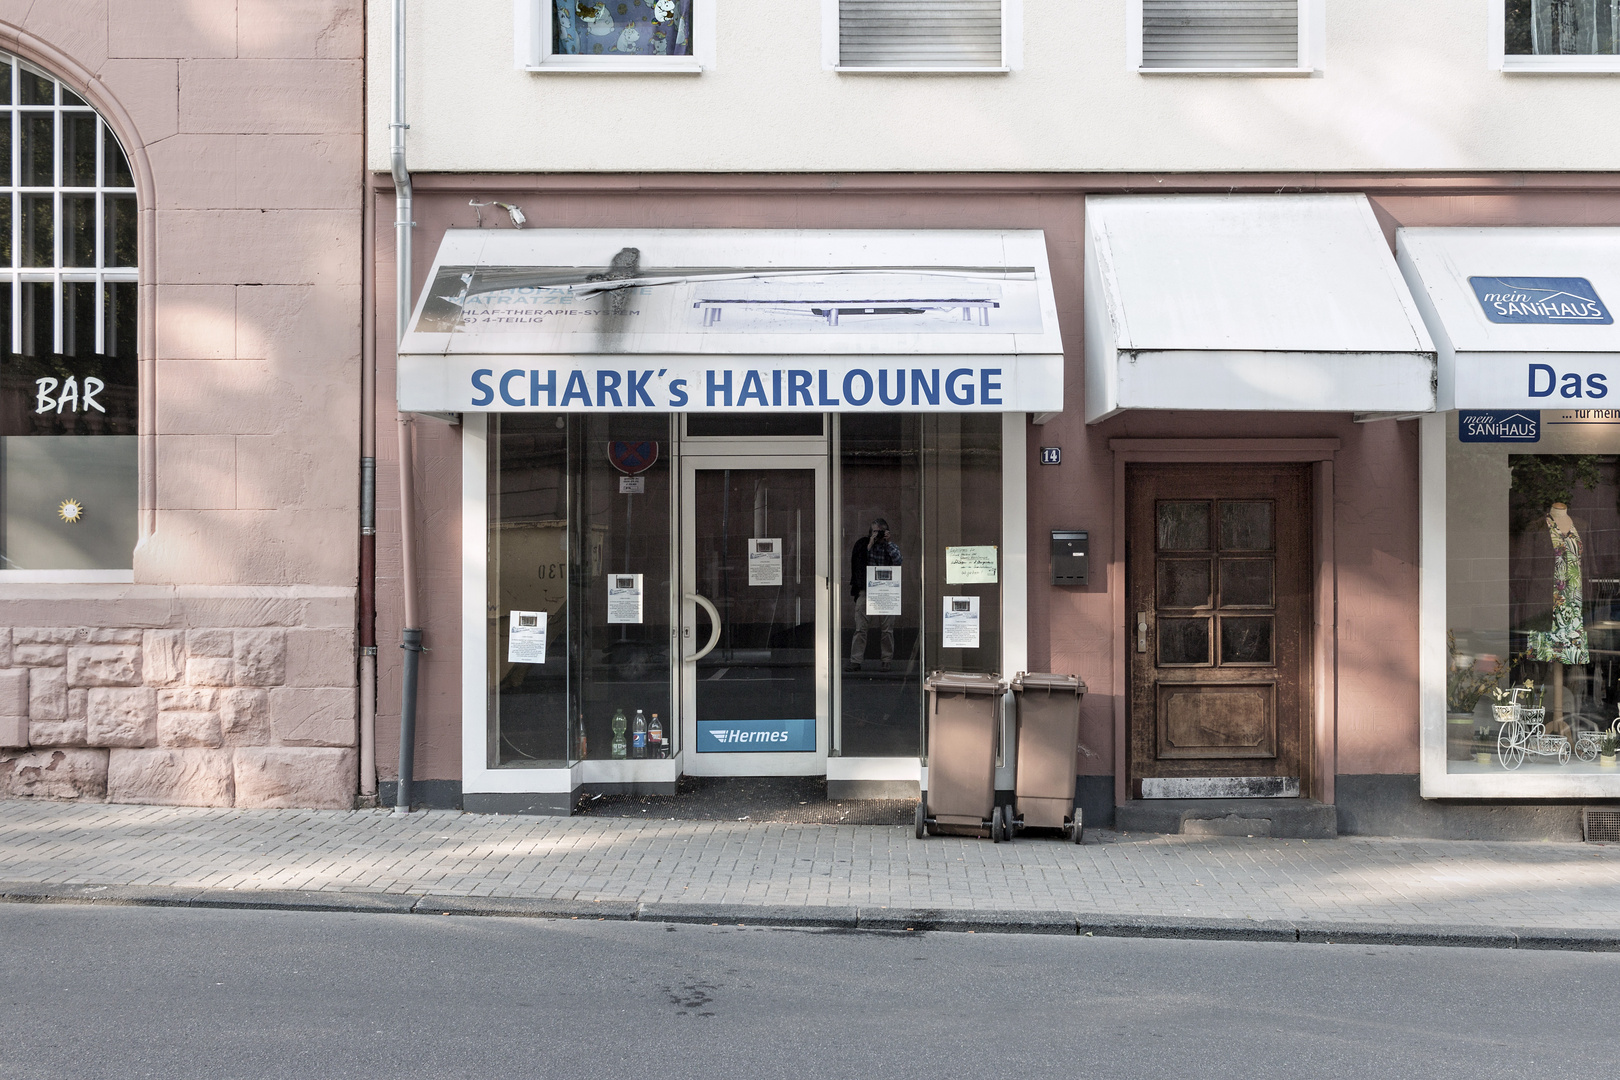 SCHARK's HAIRLOUNGE in Worms